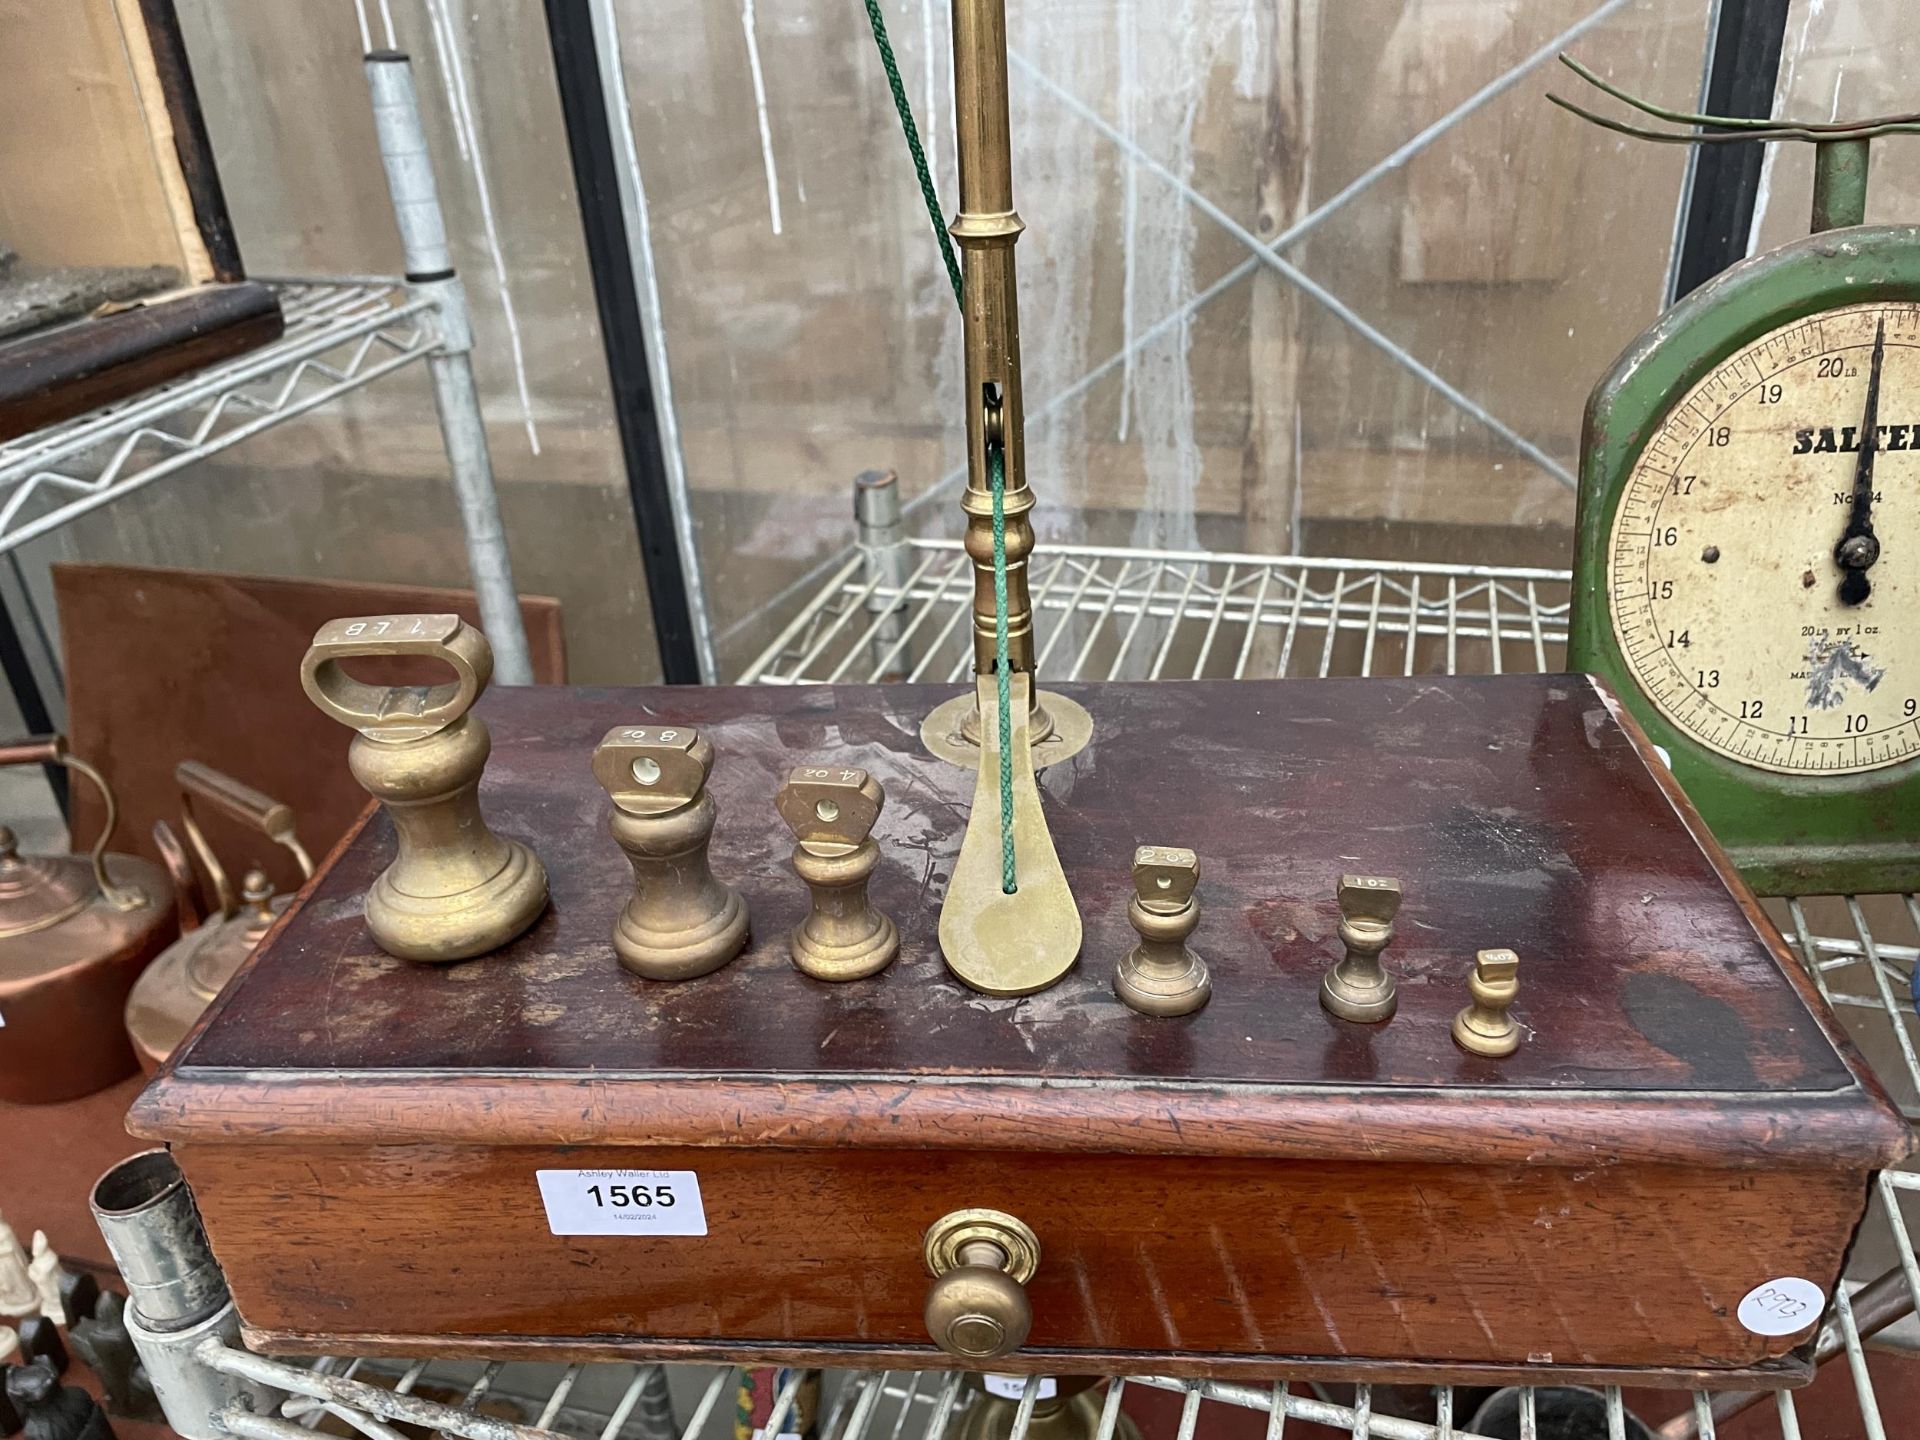 A SET OF VINTAGE BRASS SCALES WITH LOWER MAHOGANY DRAWER AND BRASS BELL WEIGHTS - Image 2 of 3